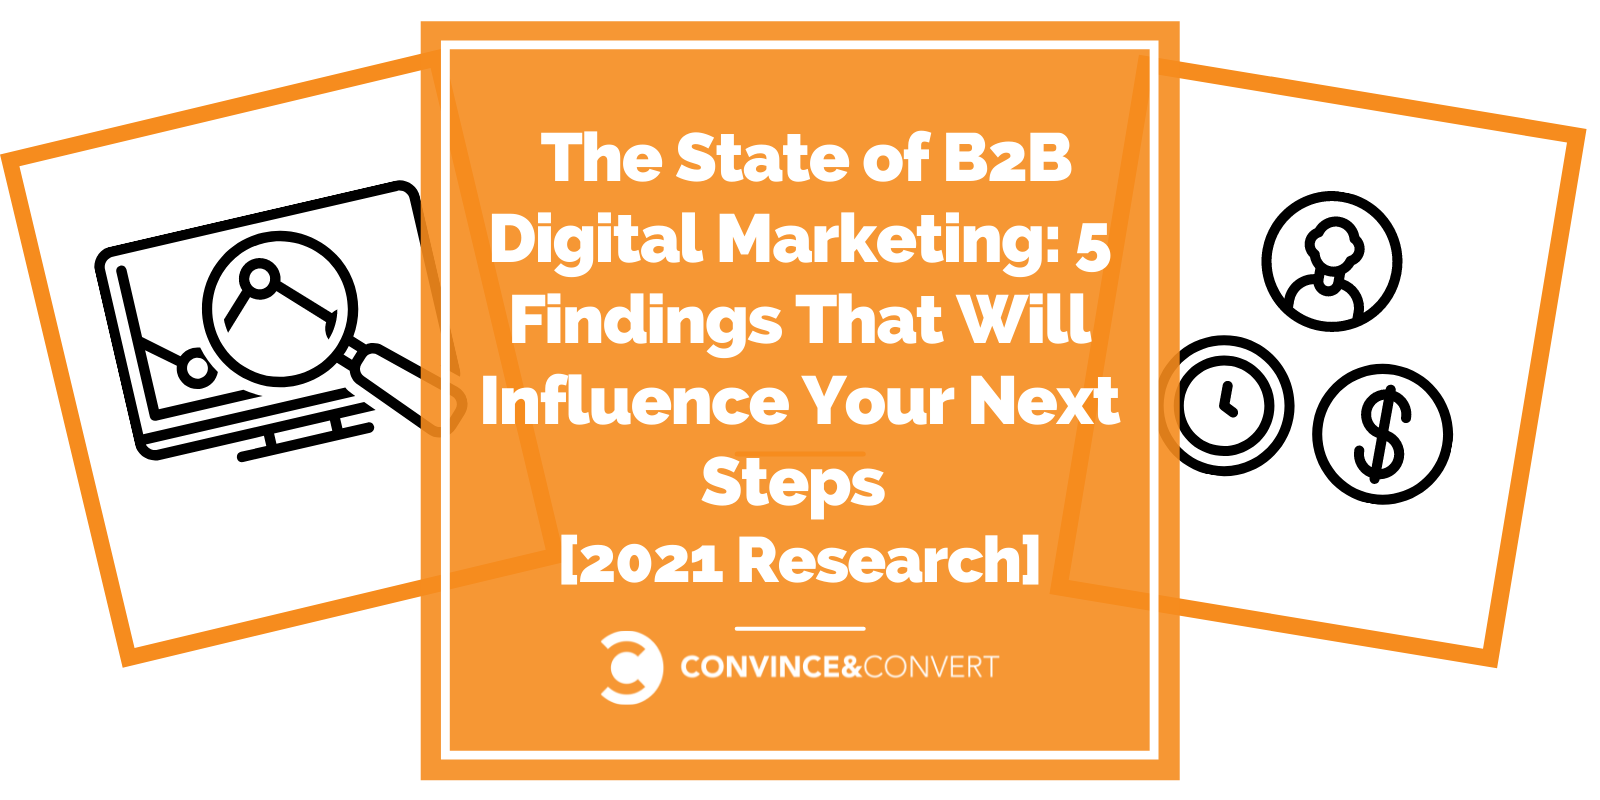 The State of B2B Digital Marketing: 5 Findings That Will Influence Your Next Steps [2021 Research]